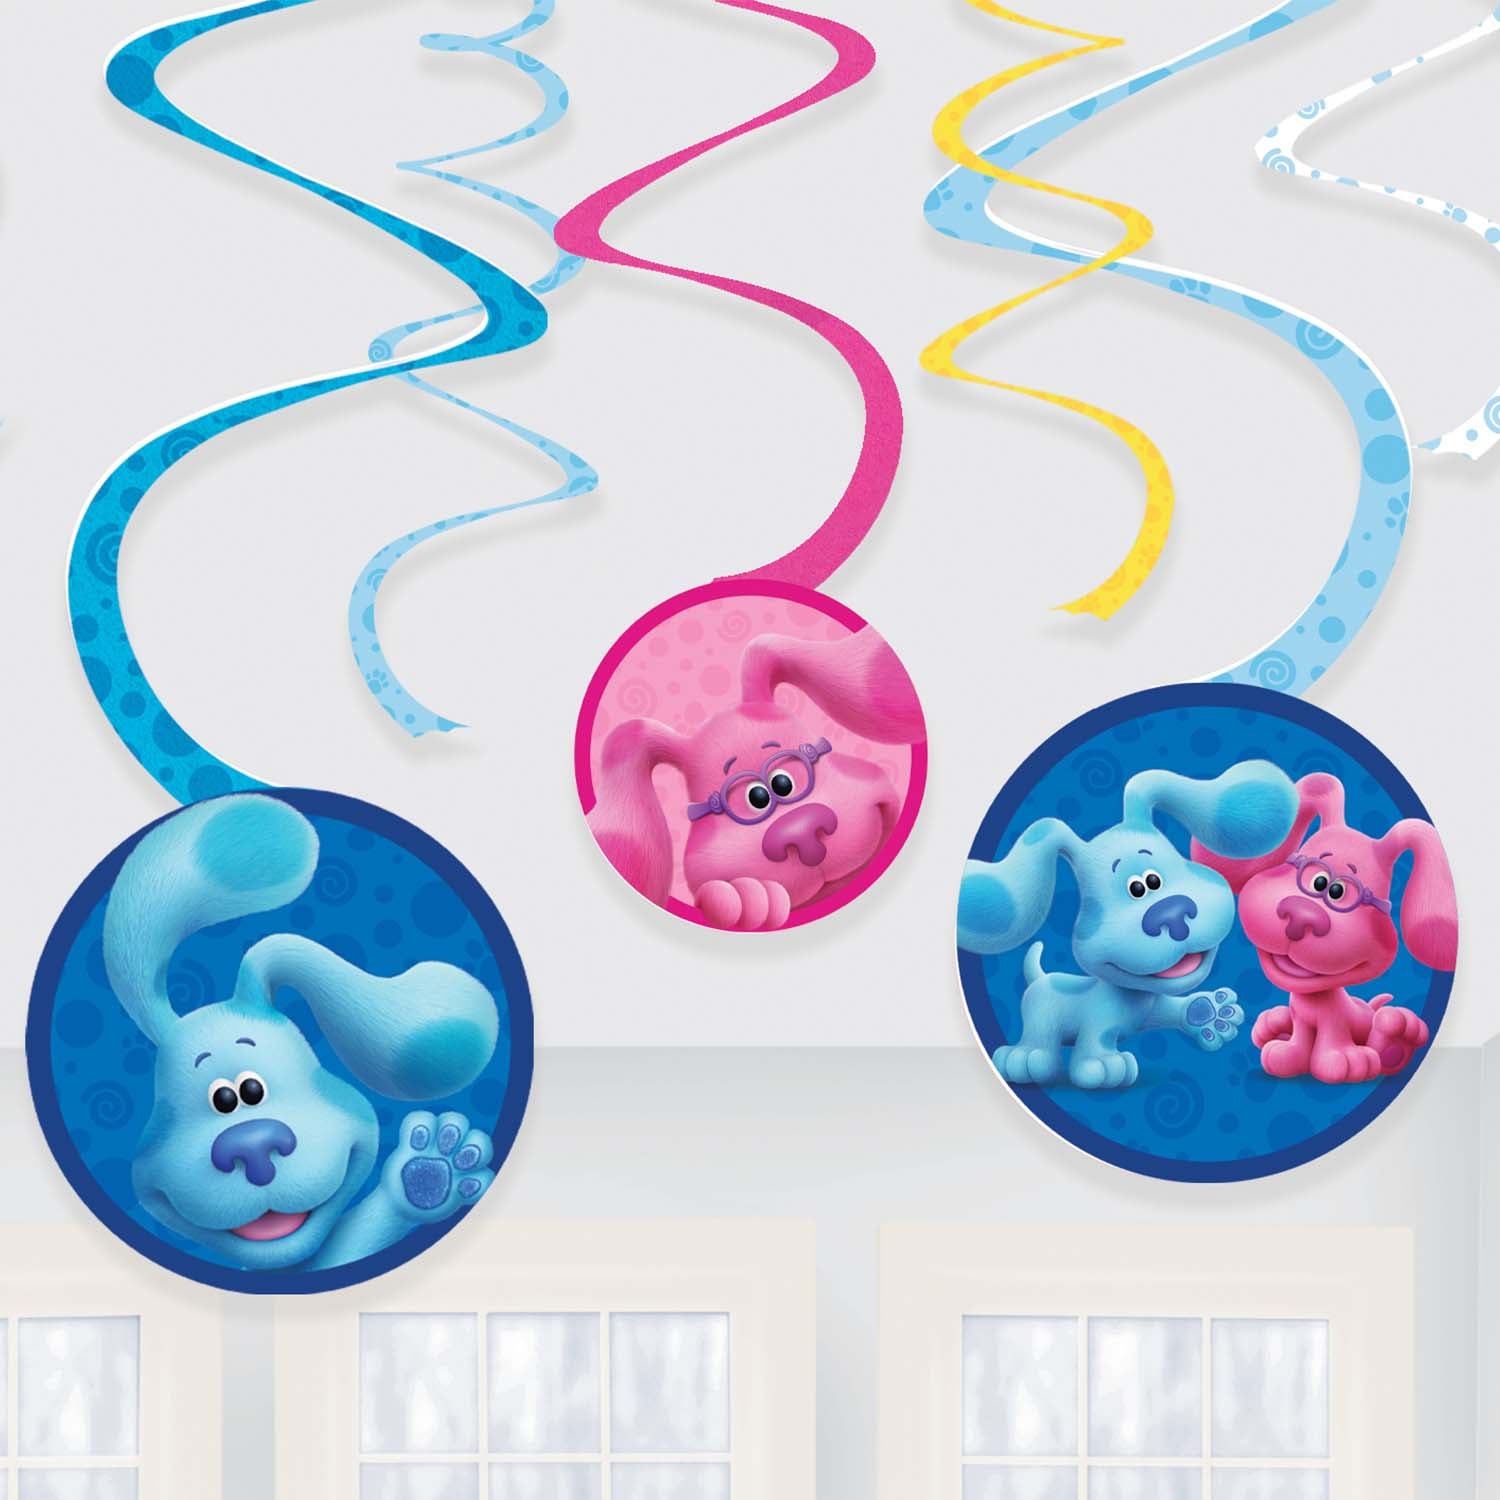 Blue's Clues Hanging Swirl Decorations 6pc